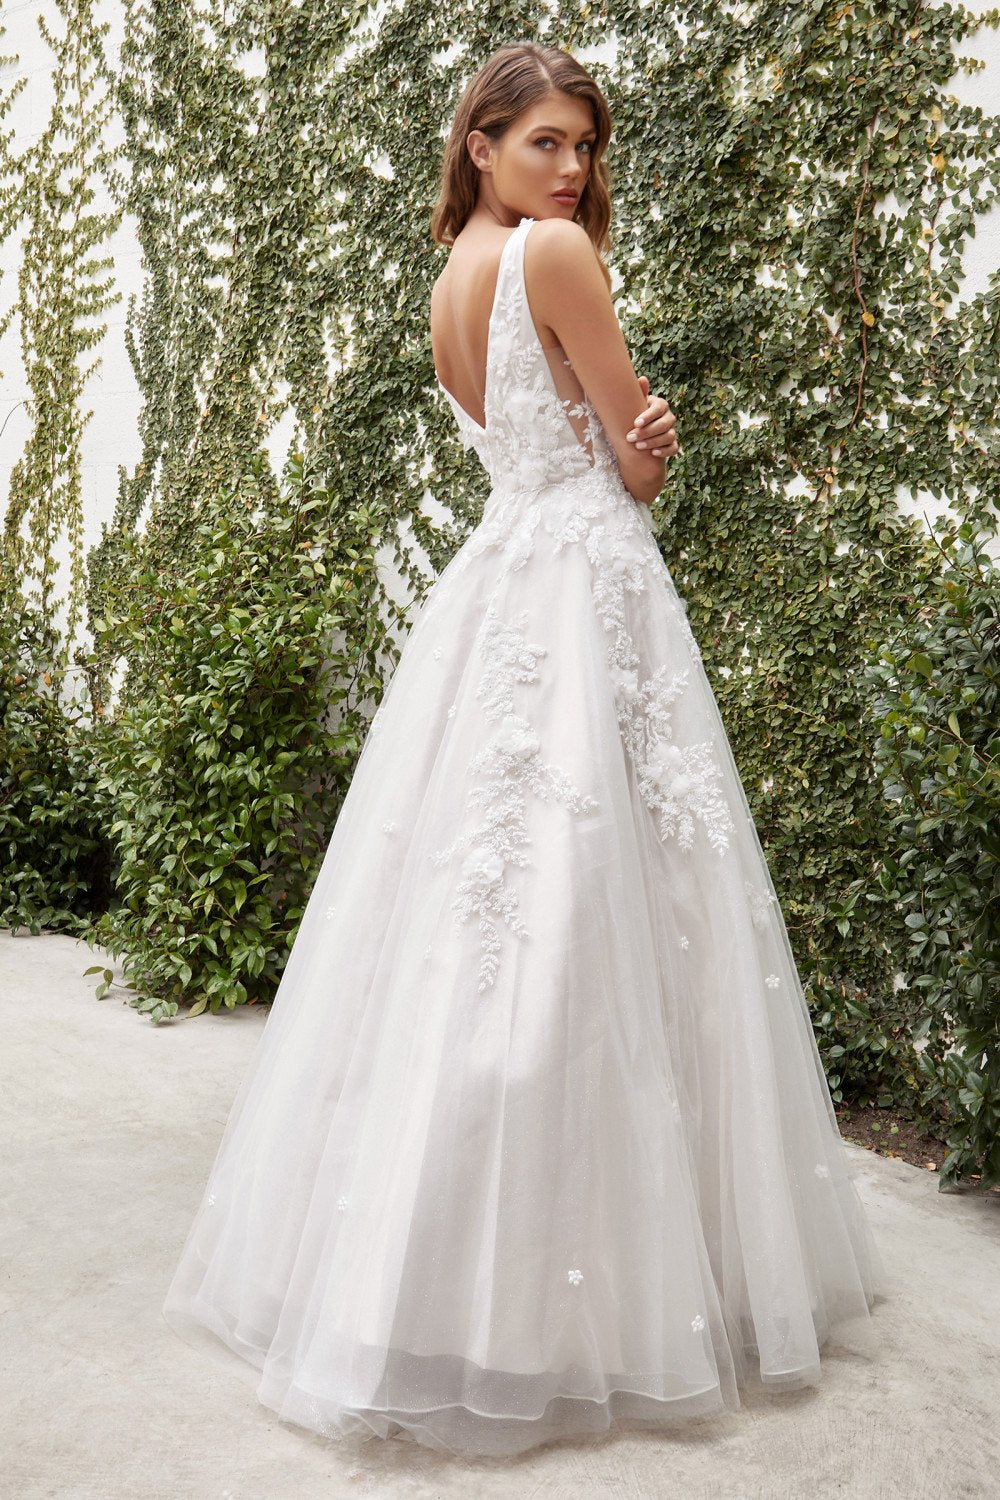 Layered Tulle Gardinia Bridal Gown by Andrea & Leo Couture - A1028W